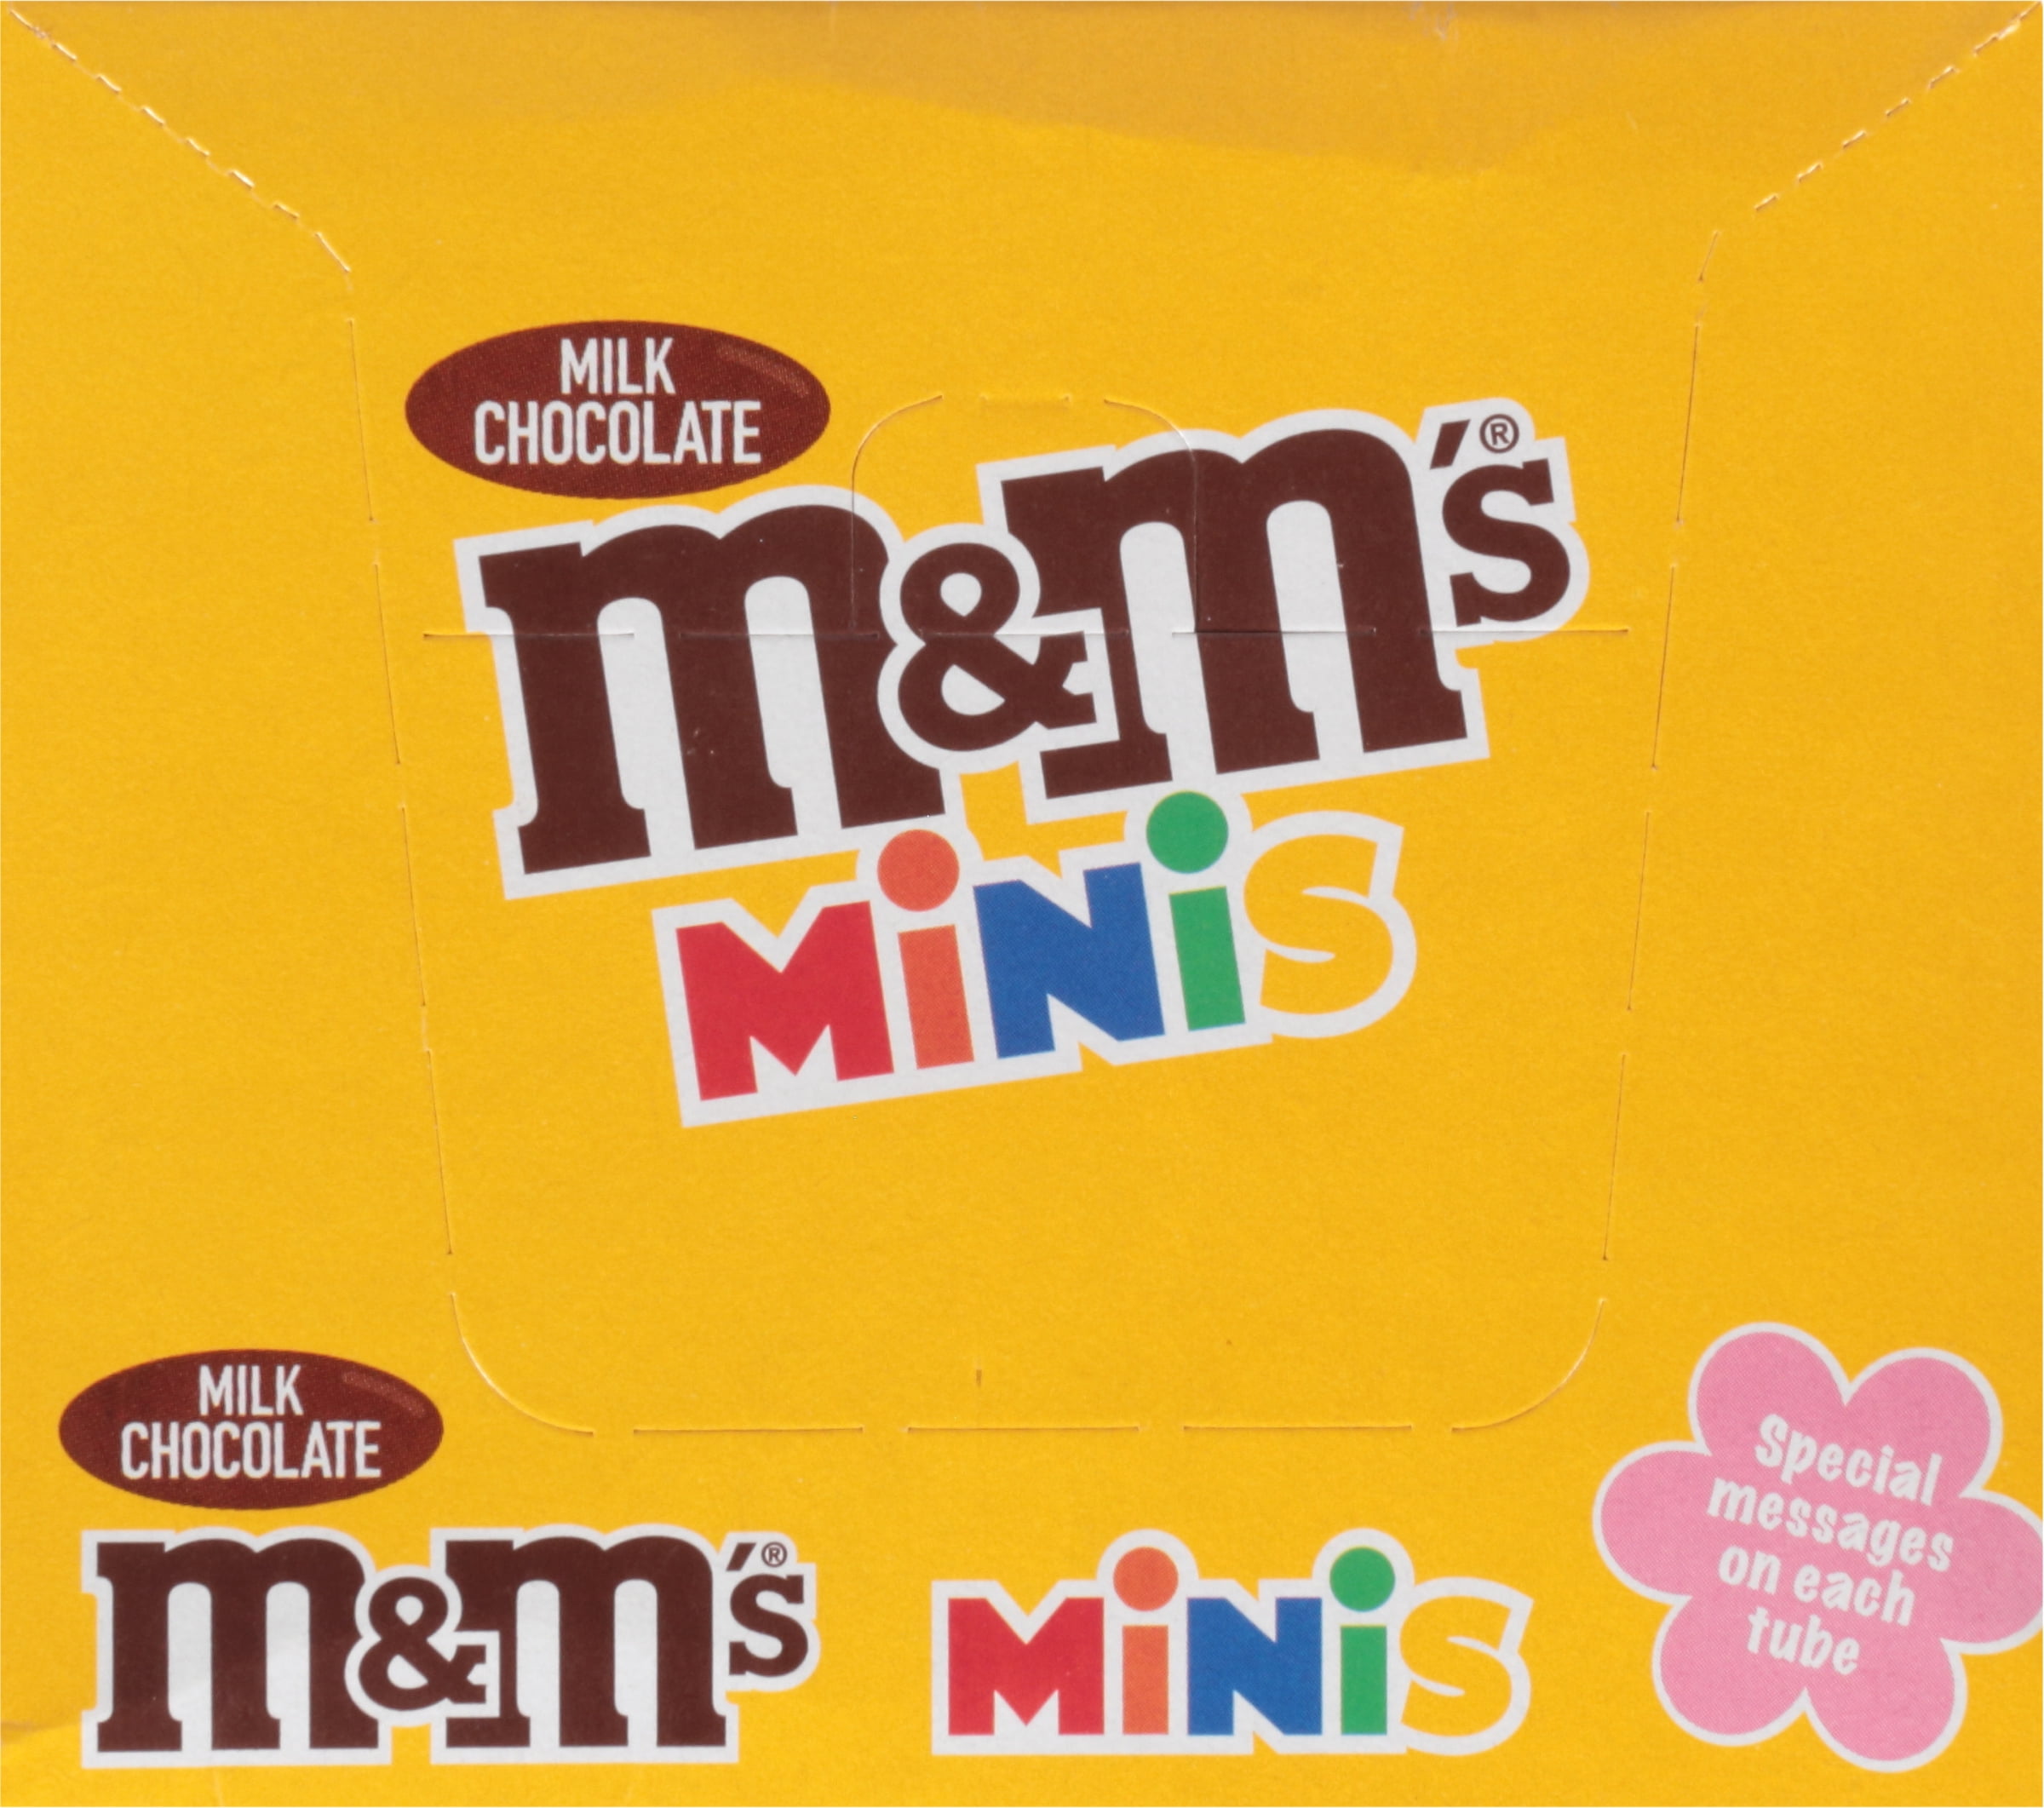 M&M'S Easter Milk Chocolate MINIS Size Candy, 1.08-Ounce Tube 24-Count Box